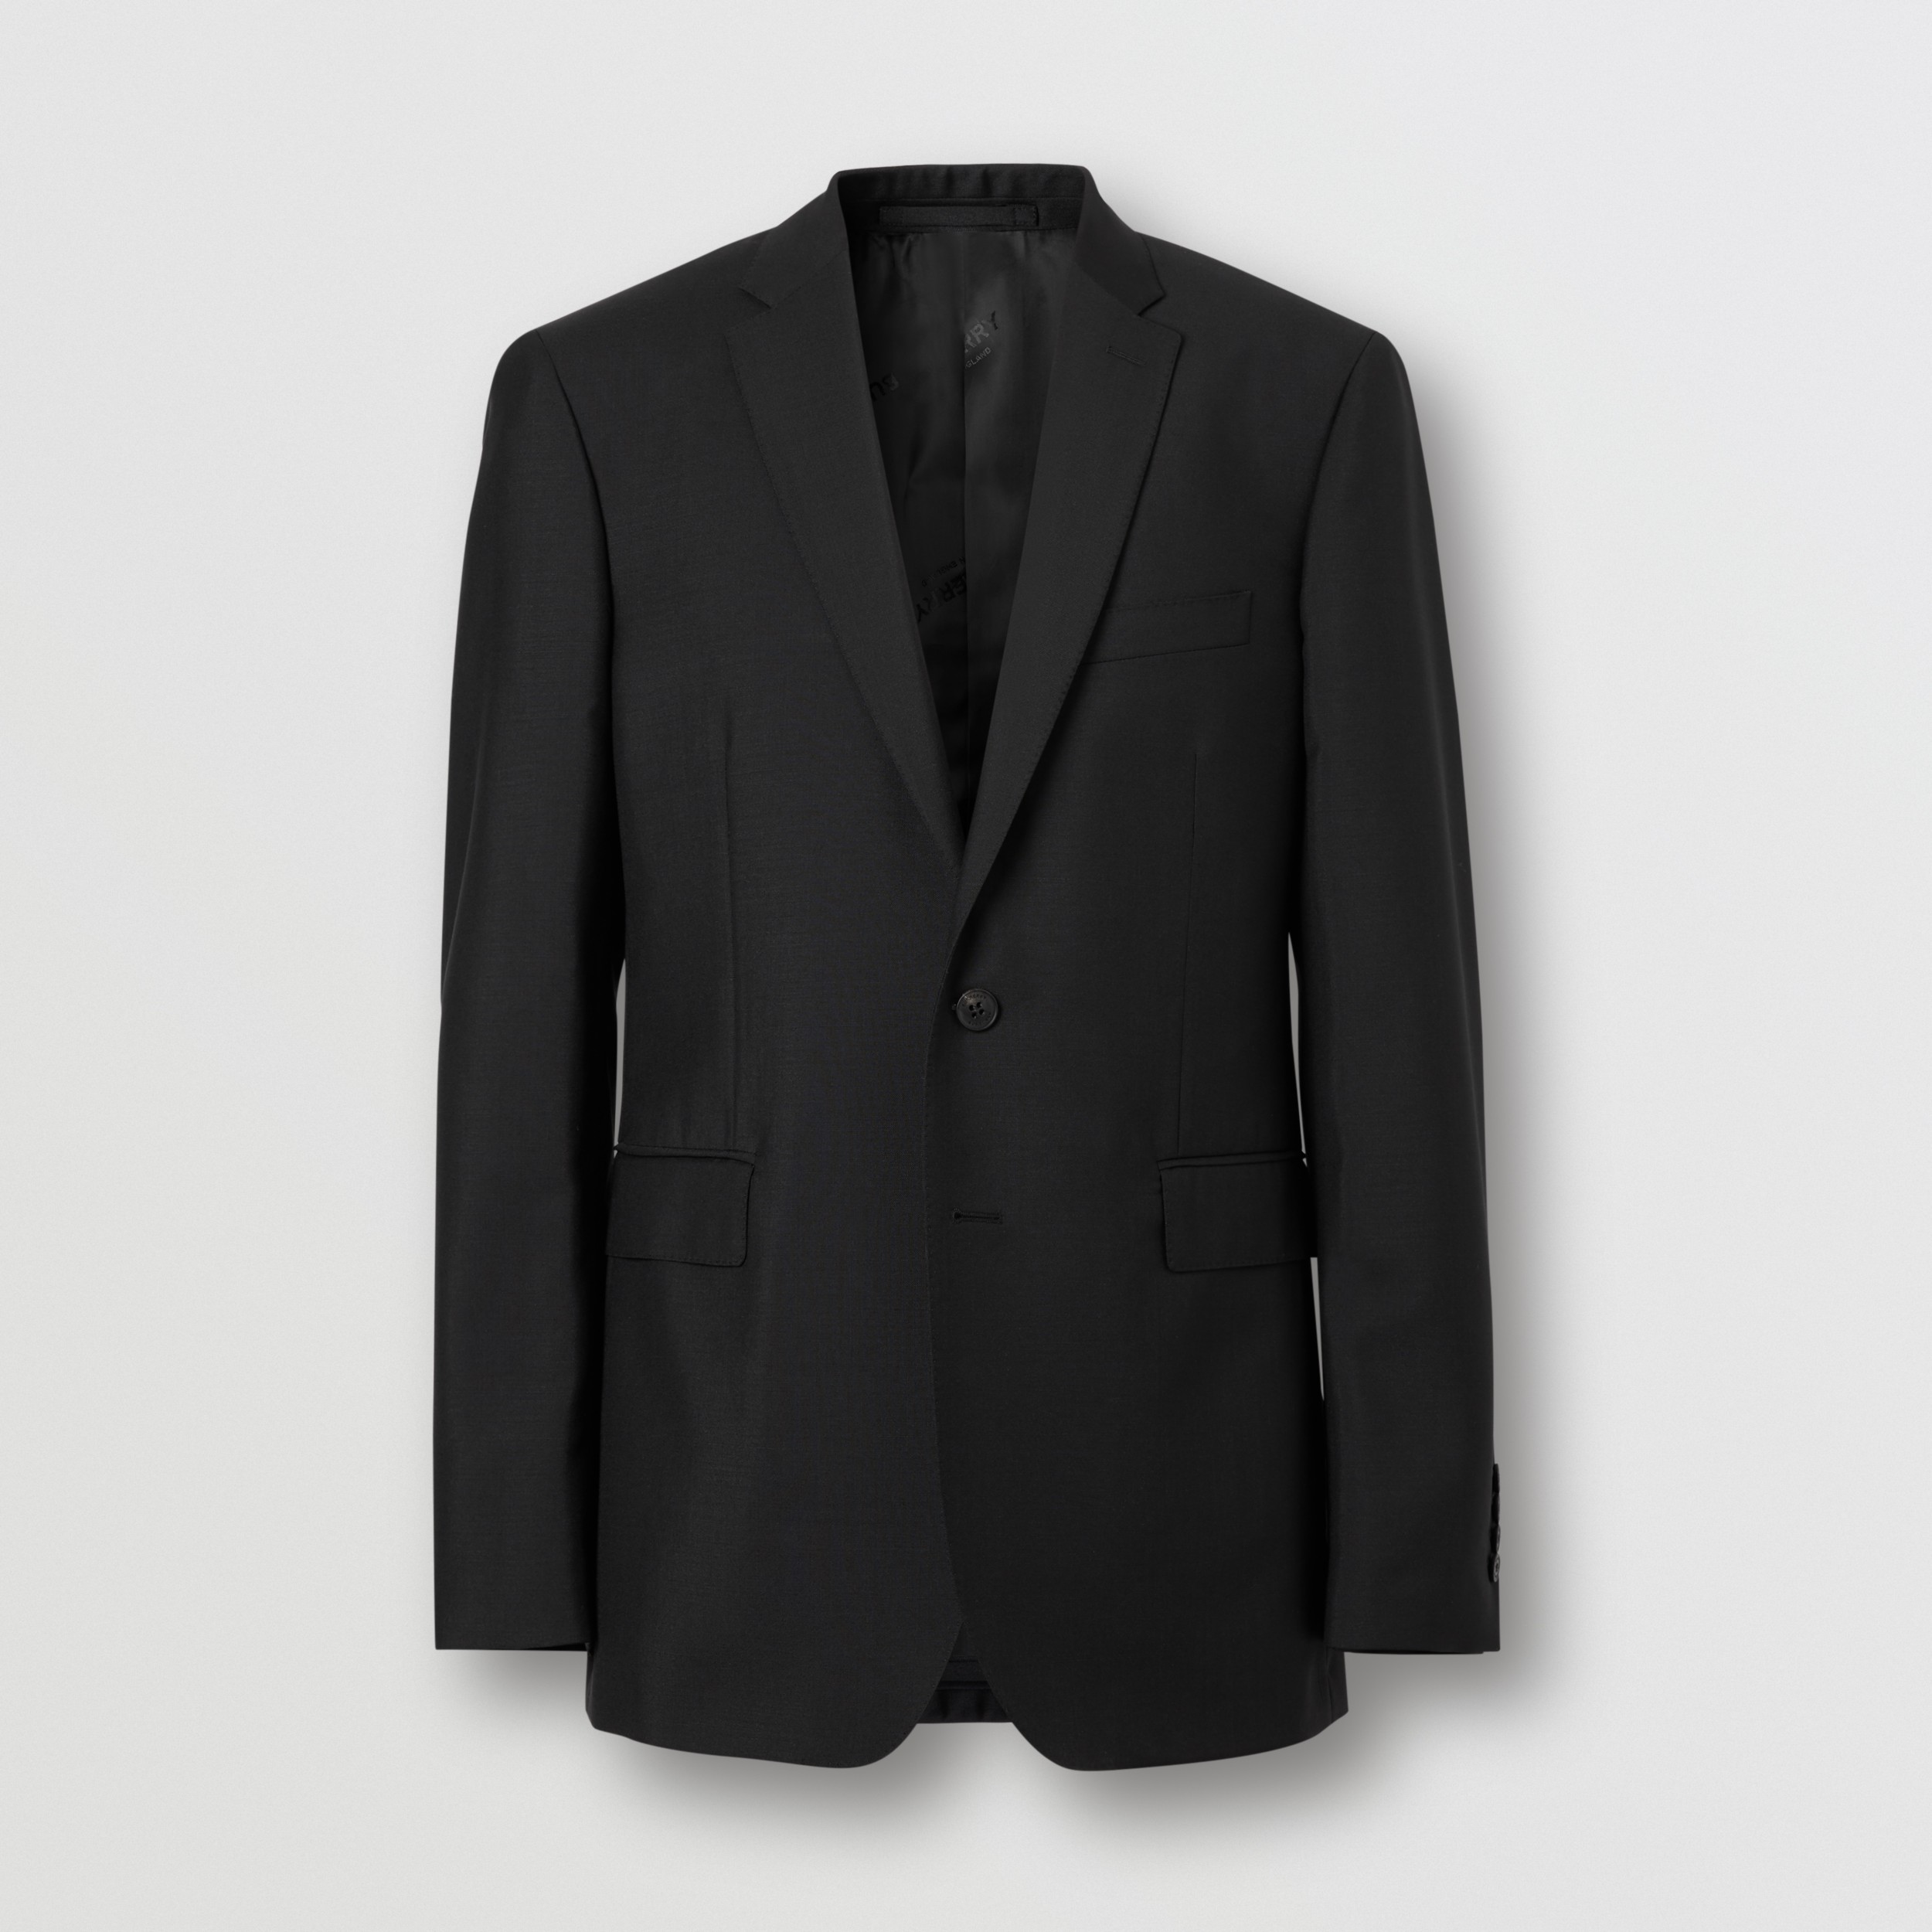 Slim Fit Wool Mohair Suit in Black - Men | Burberry United States